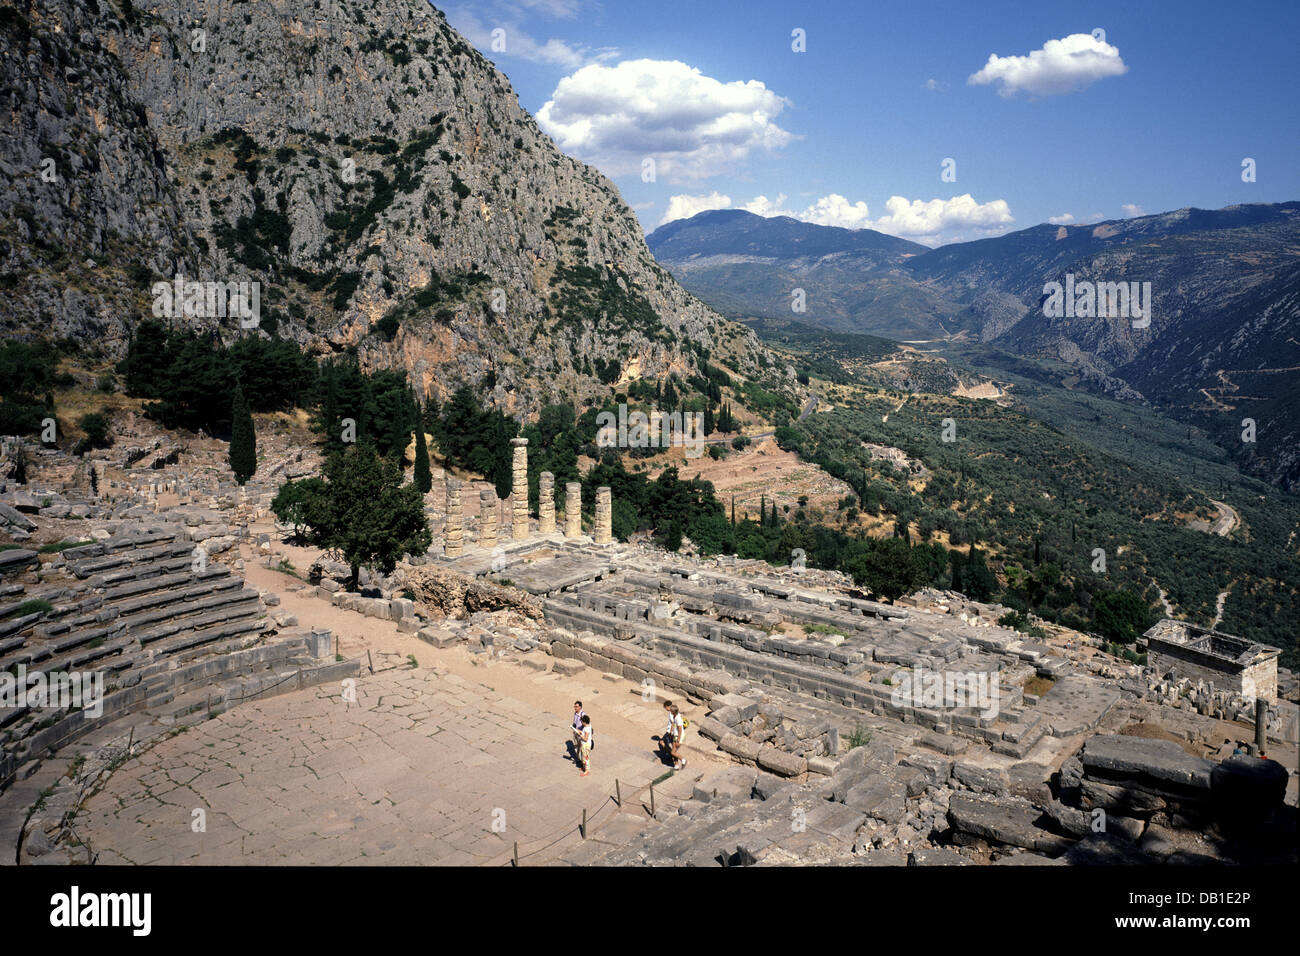 The picture shows both the theatre and the ruins of the Temple of Apollo (L) in Delphi, Greece, March 2007. Delphi was one of the most important cult sites of ancient Greece, both as a site for the worship of the god Apollo and of the Delphic oracle. Photo: Friedel Gierth Stock Photo